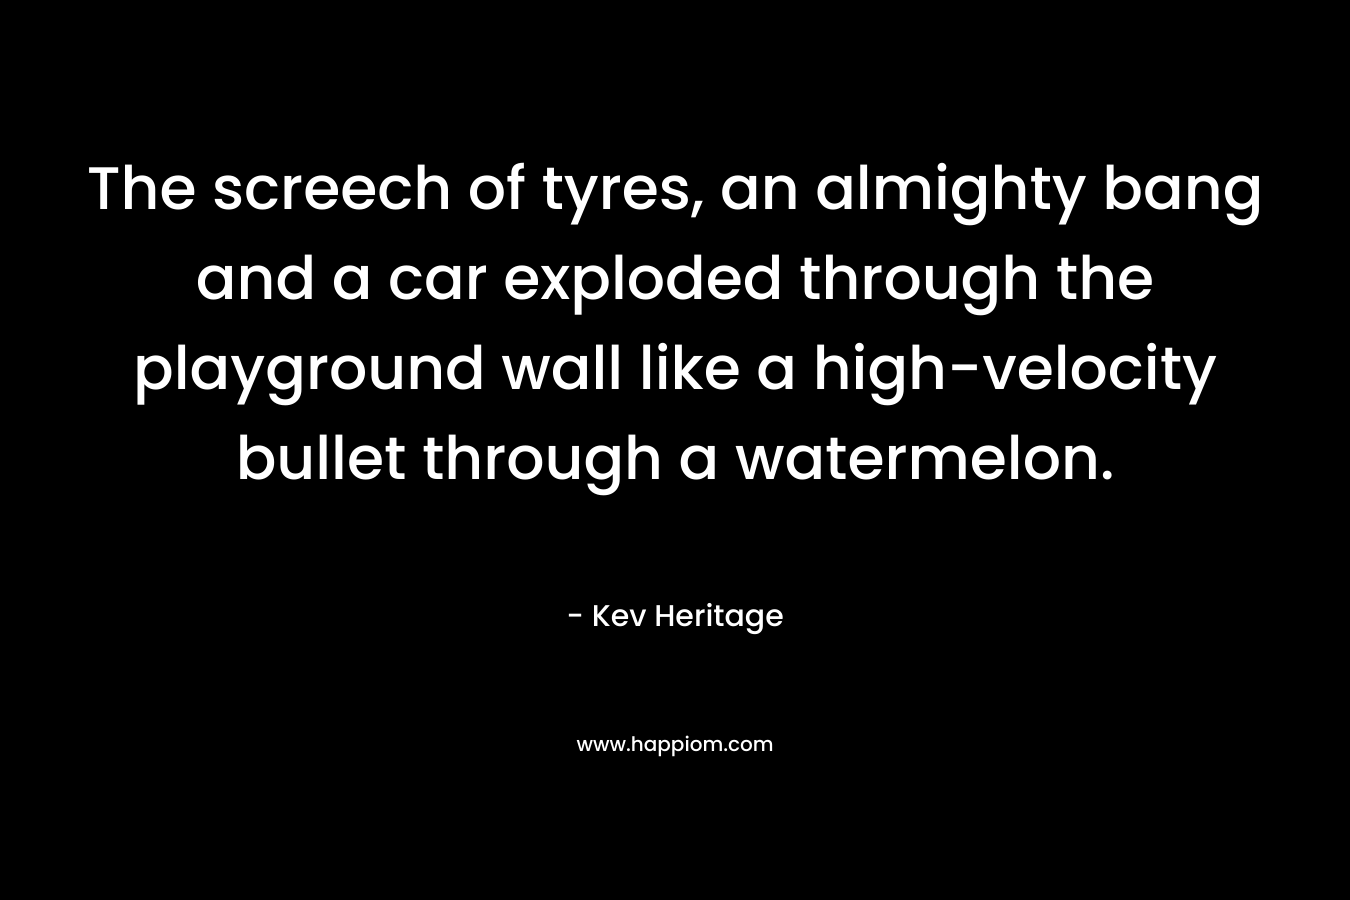 The screech of tyres, an almighty bang and a car exploded through the playground wall like a high-velocity bullet through a watermelon.